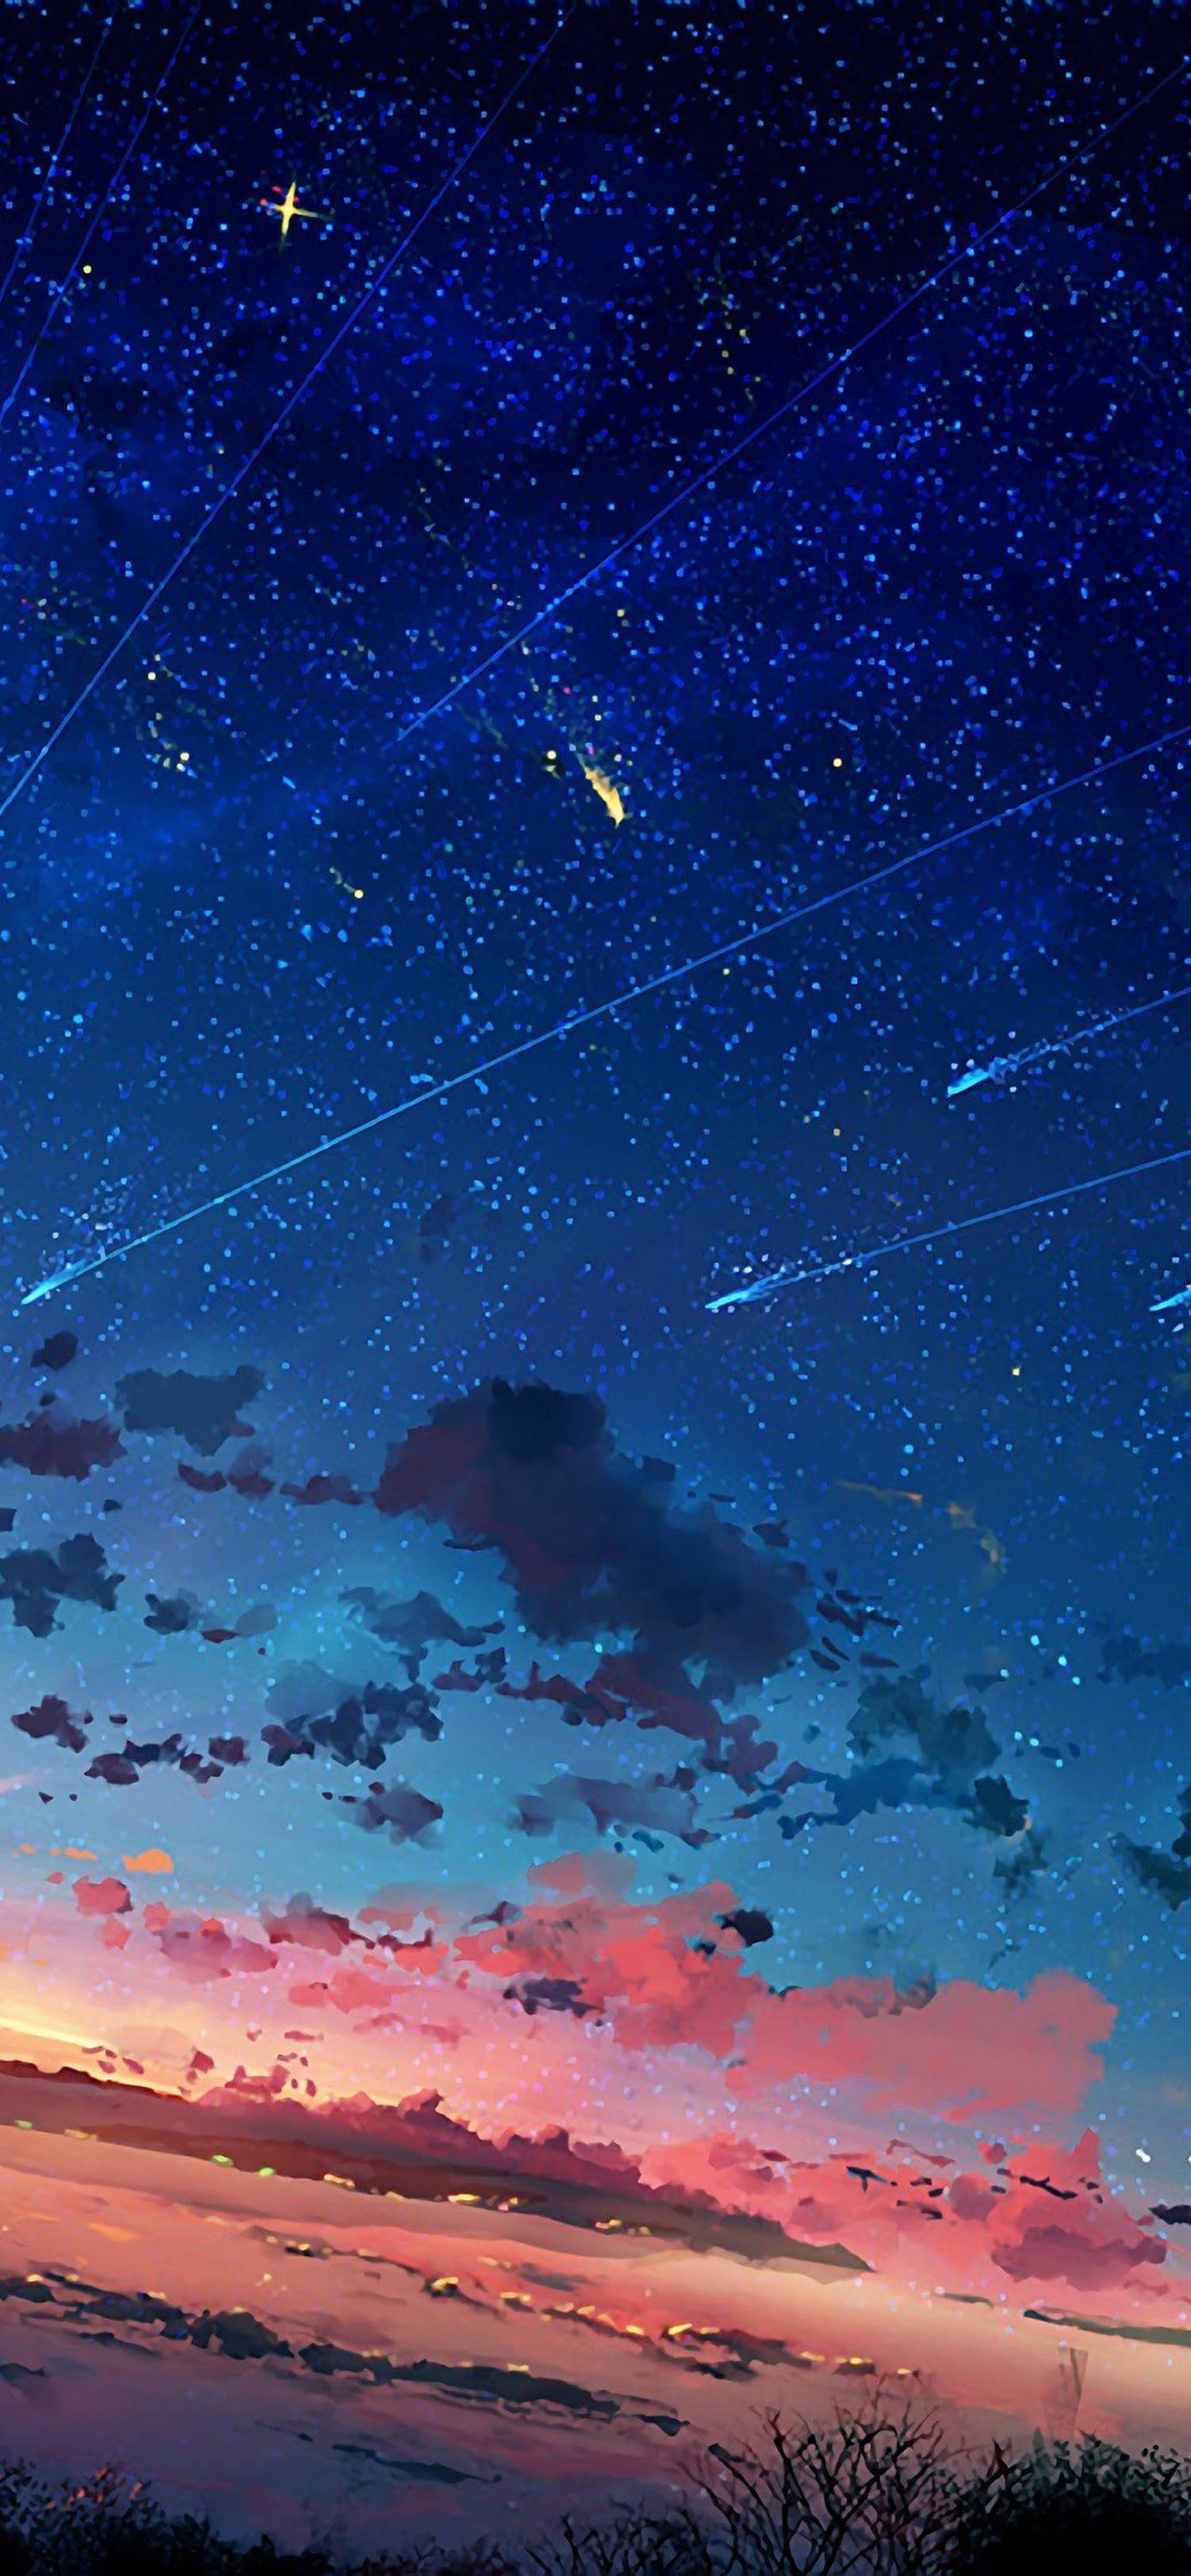 4k Anime Iphone Falling Stars And Comet